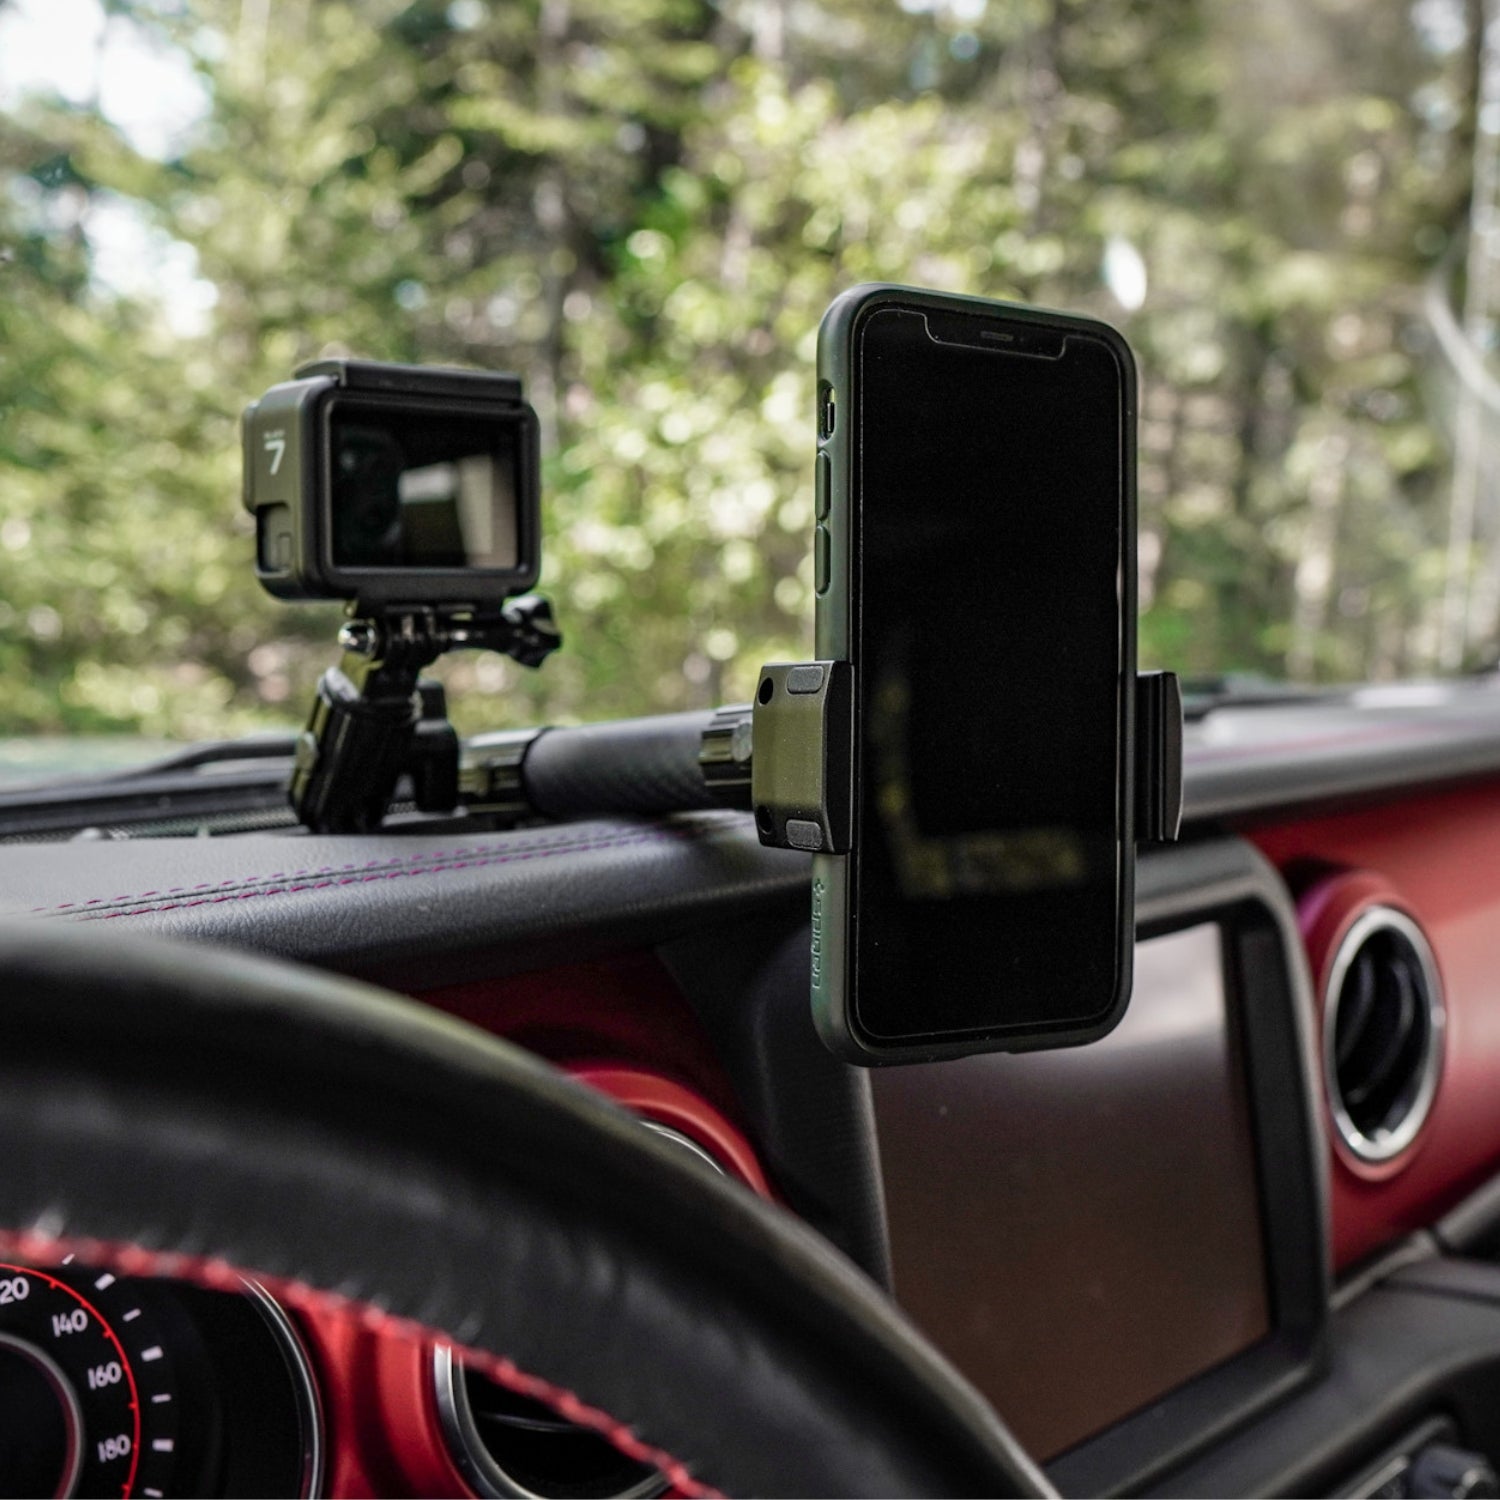 Jeep Wrangler Phone Mount - Bulletpoint Mounting Solutions